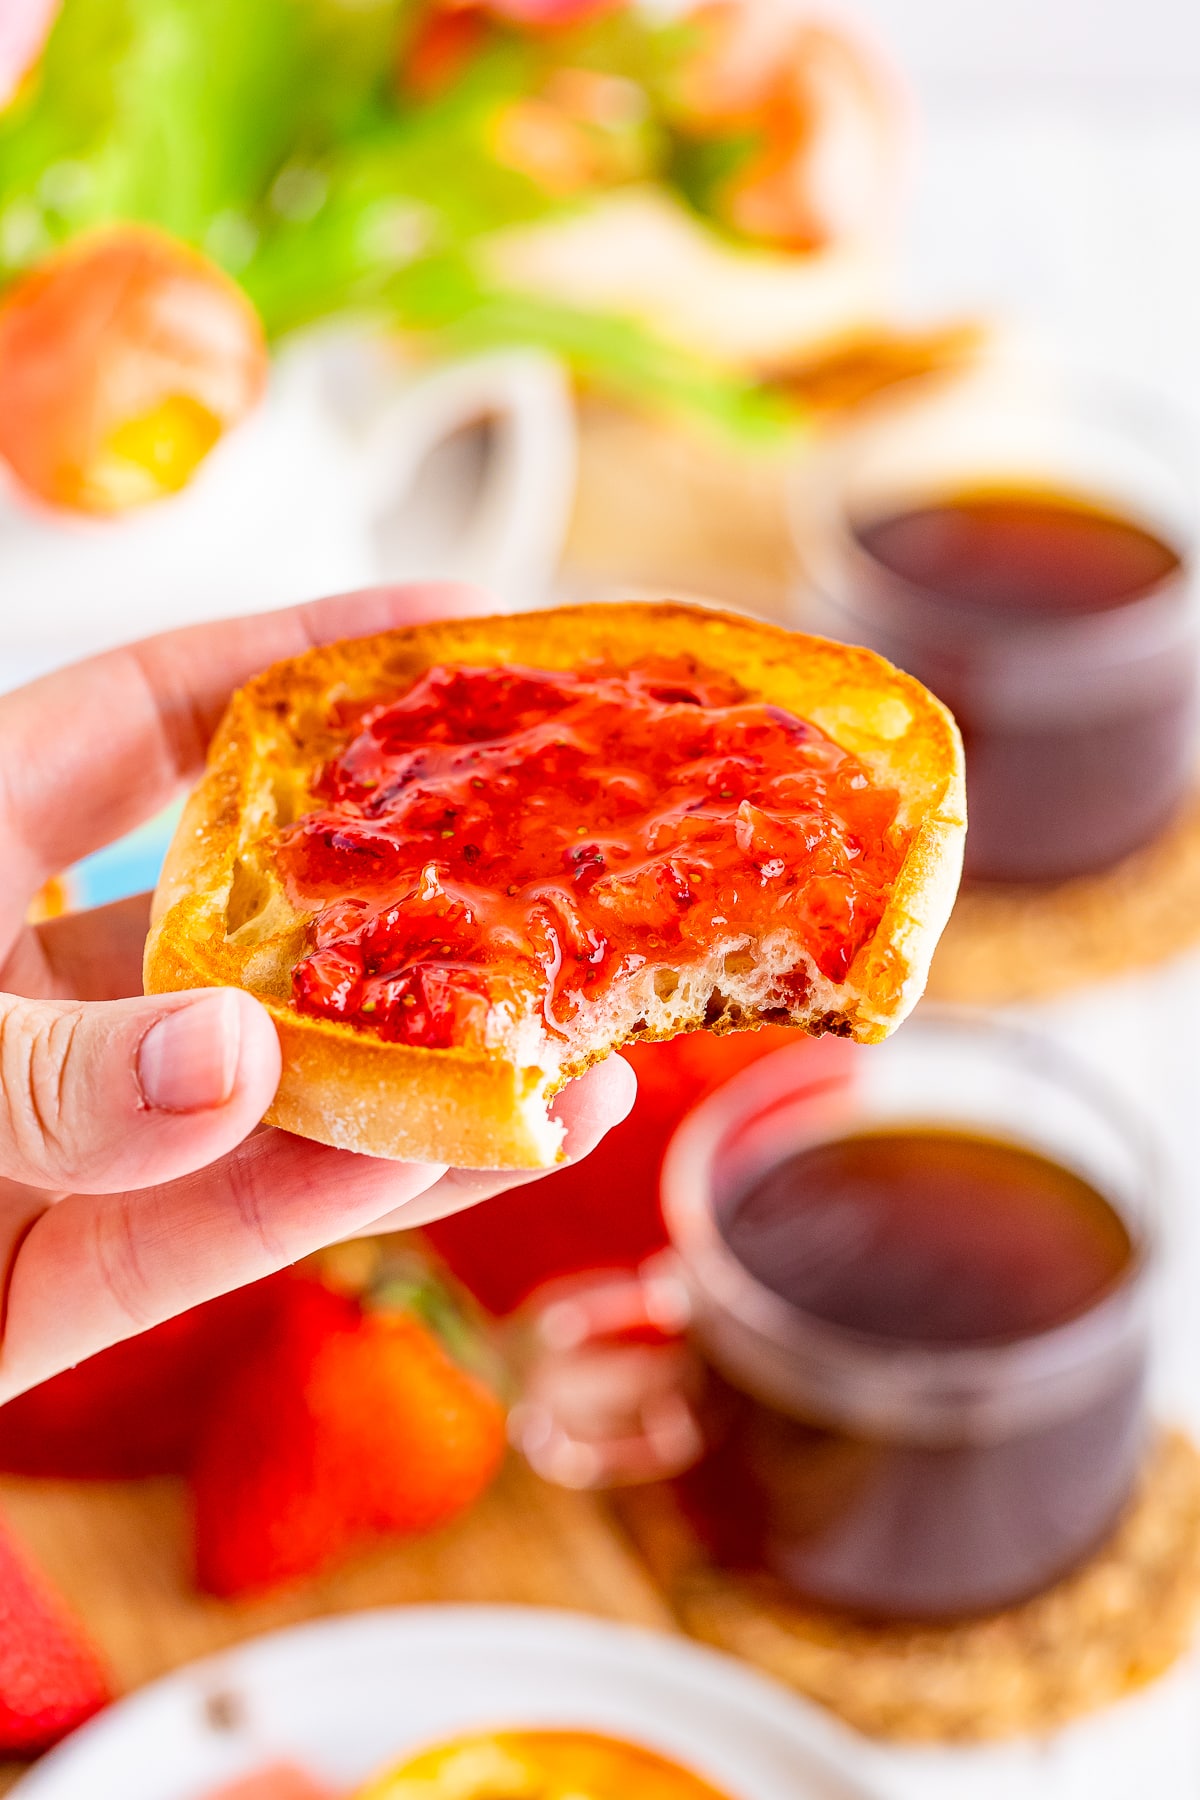 a hand holding an english muffin with strawberry freezer jam with a bite taken out